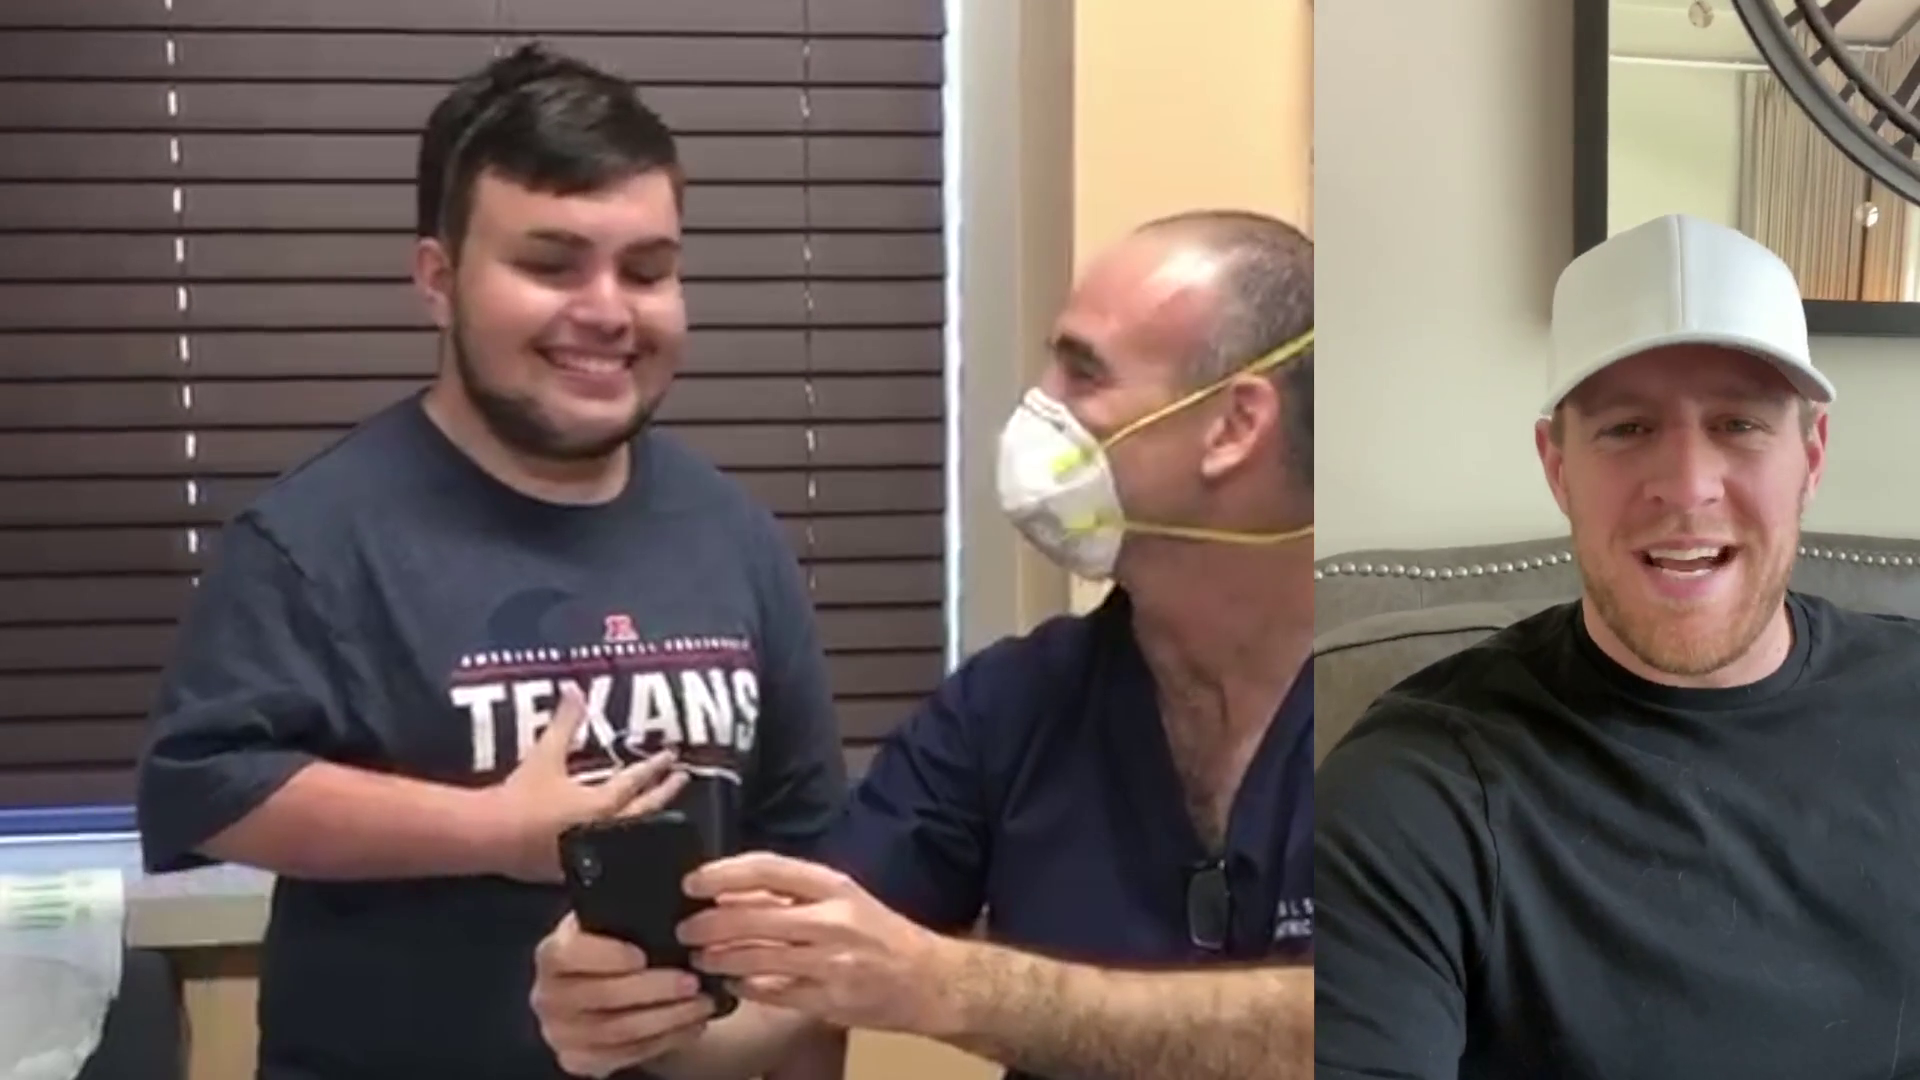 In the video, Texans star defensive end J.J. Watt commended Stu for his strength and encouraged him to stay strong.